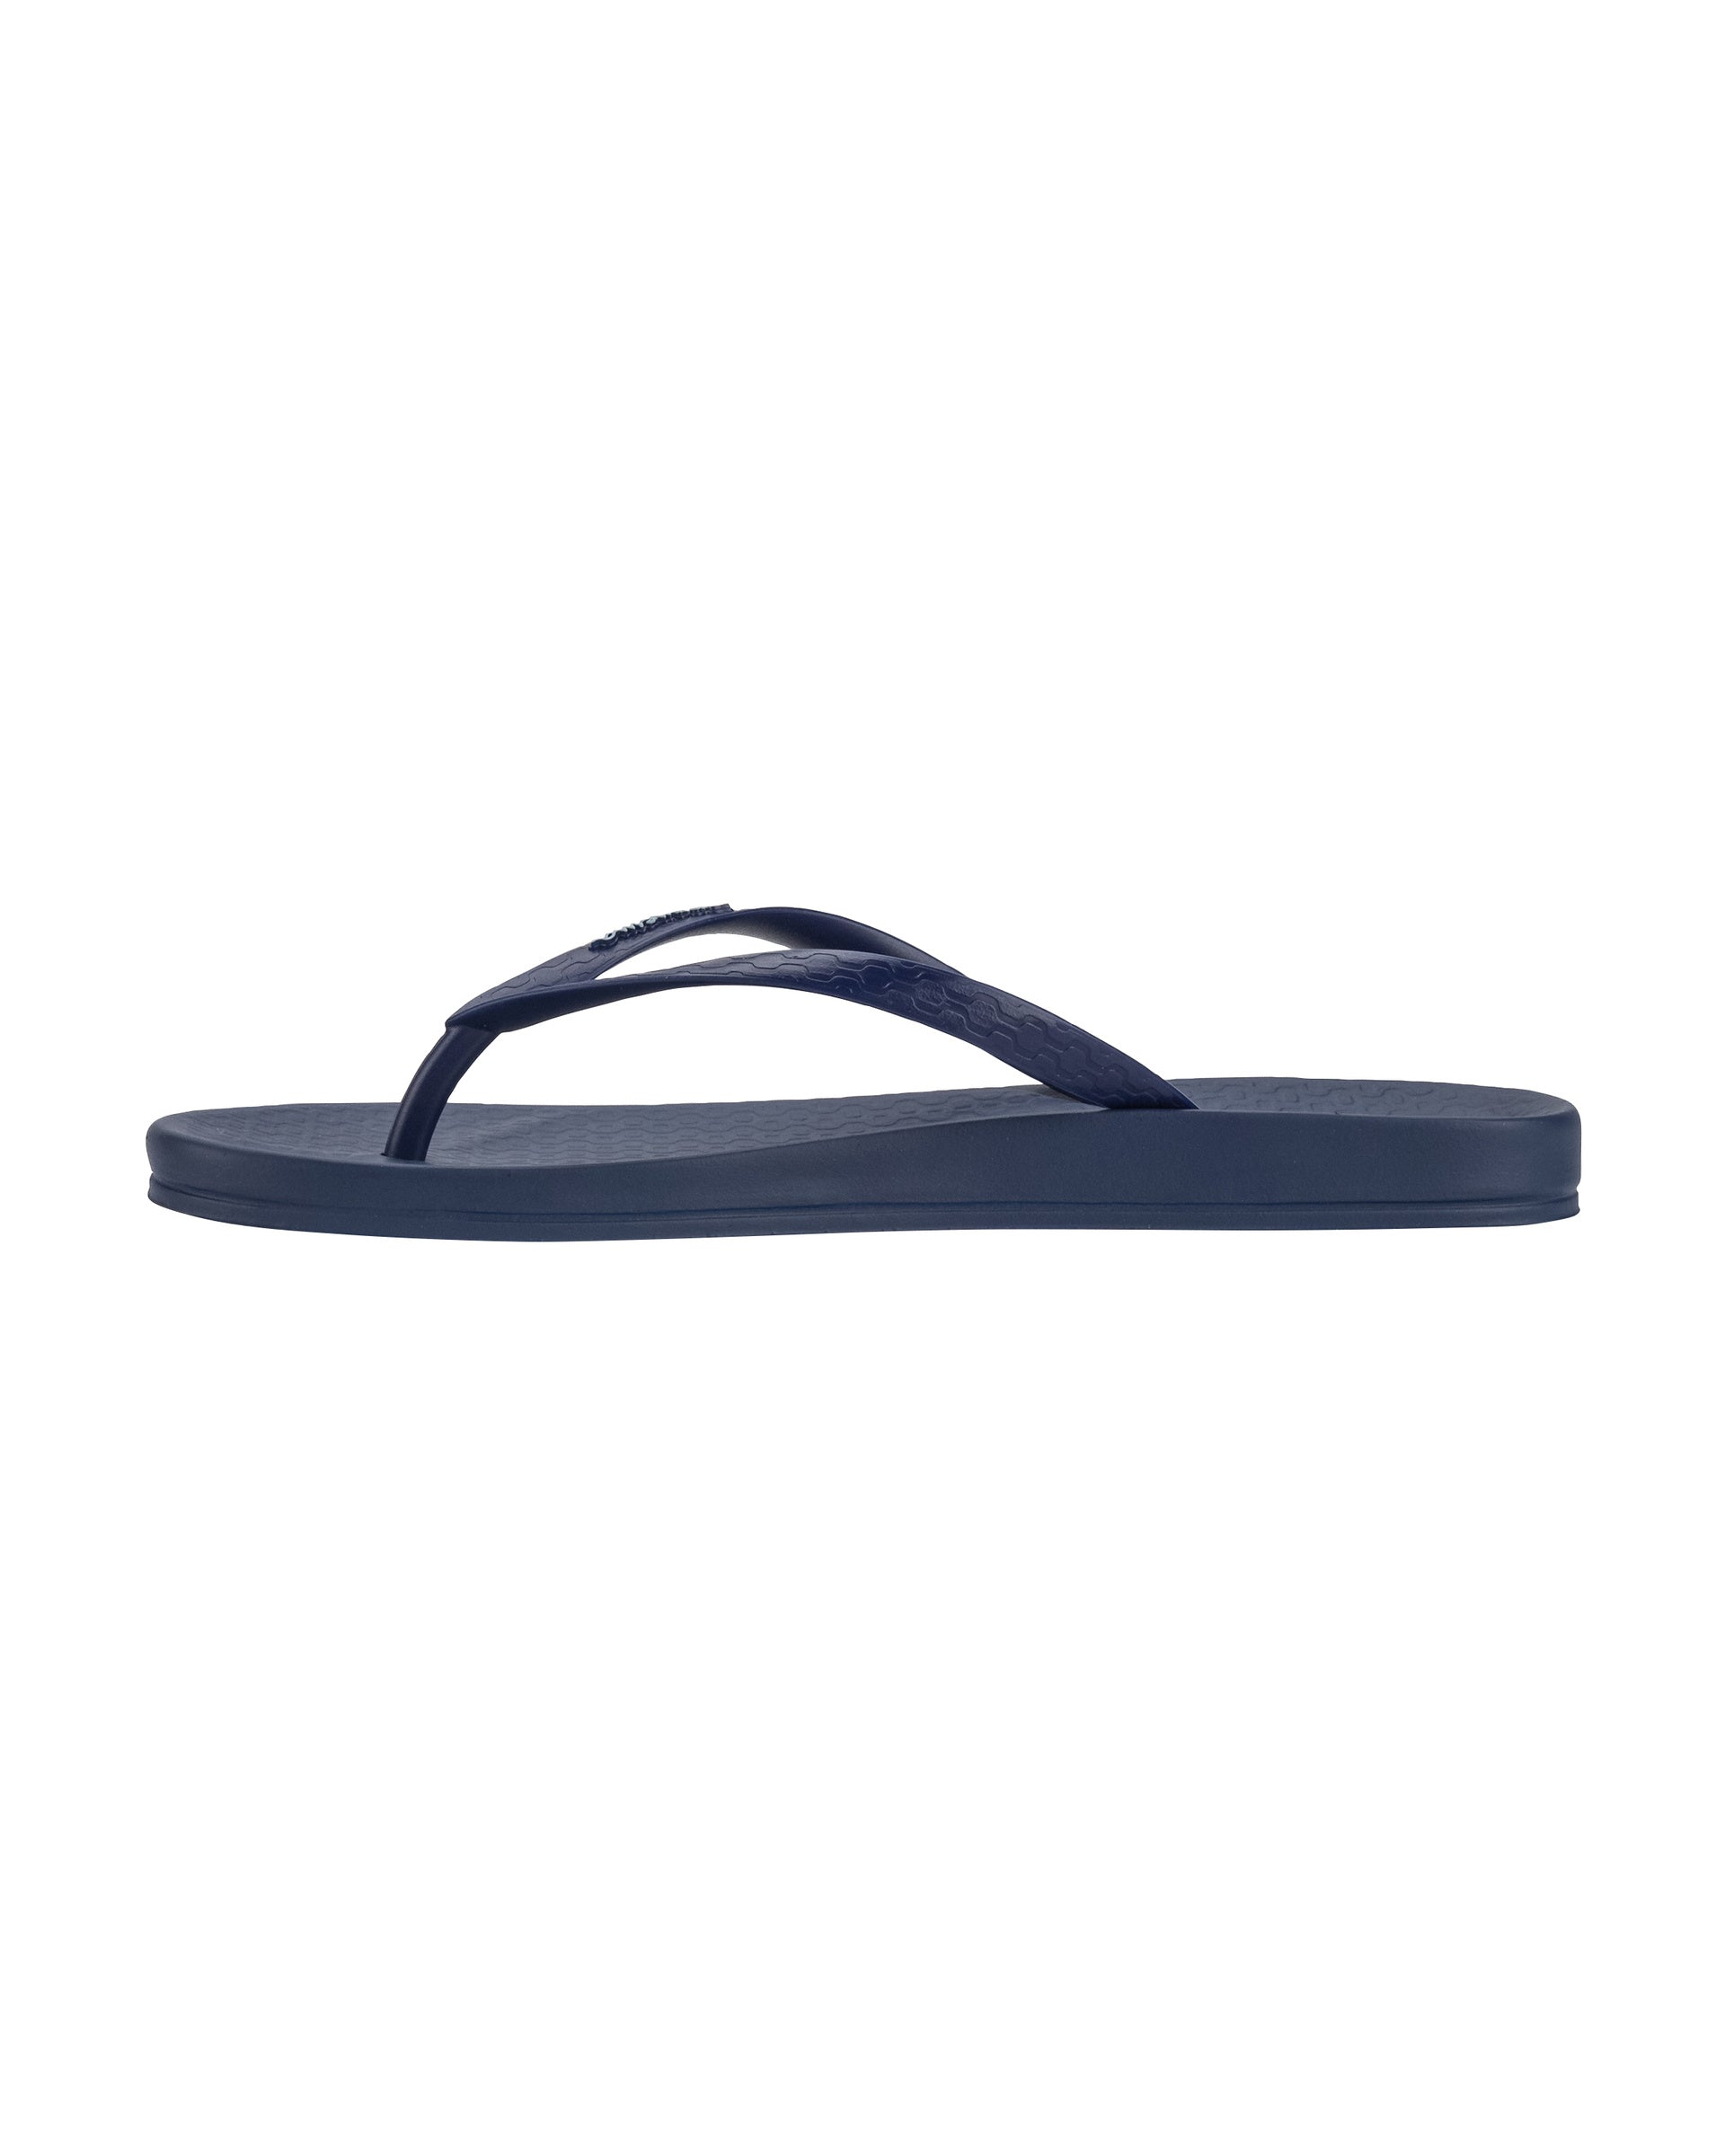 Inner side view of a blue Ipanema Ana Colors women's flip flop.